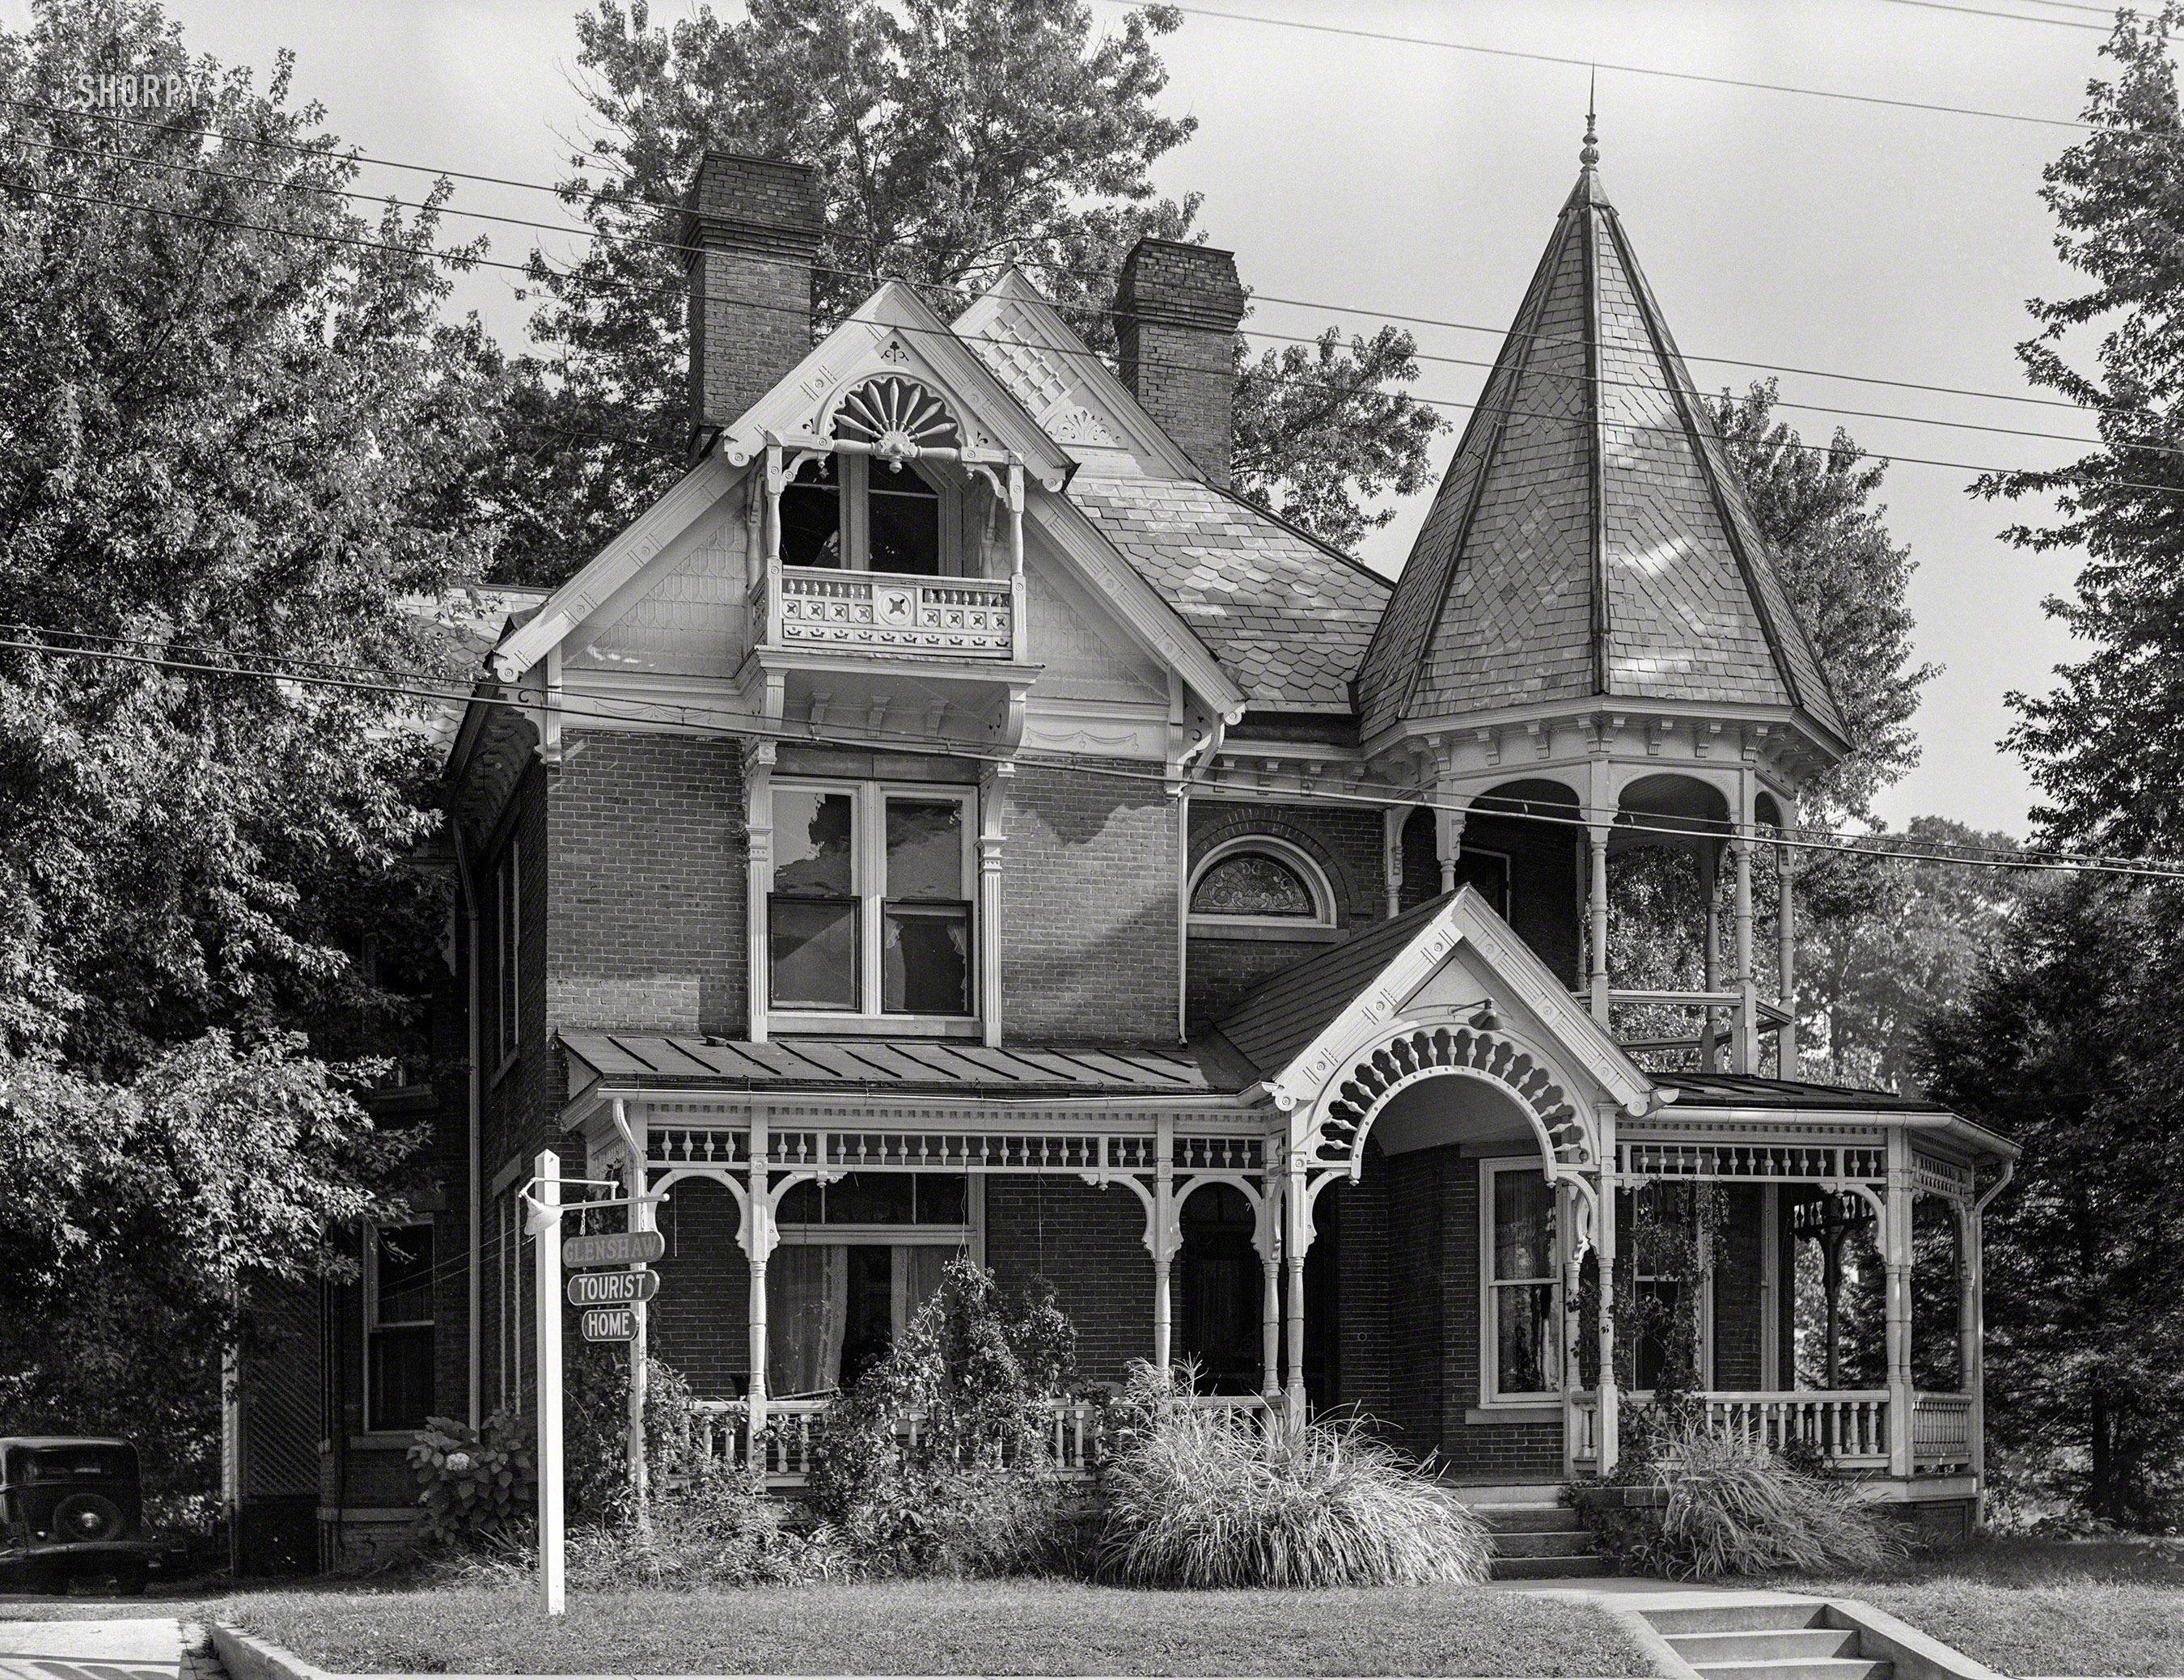 September 1938. "Old private house, now a tourist home. Buckhannon, West Virginia." Medium format negative by Marion Post Wolcott. View full size.